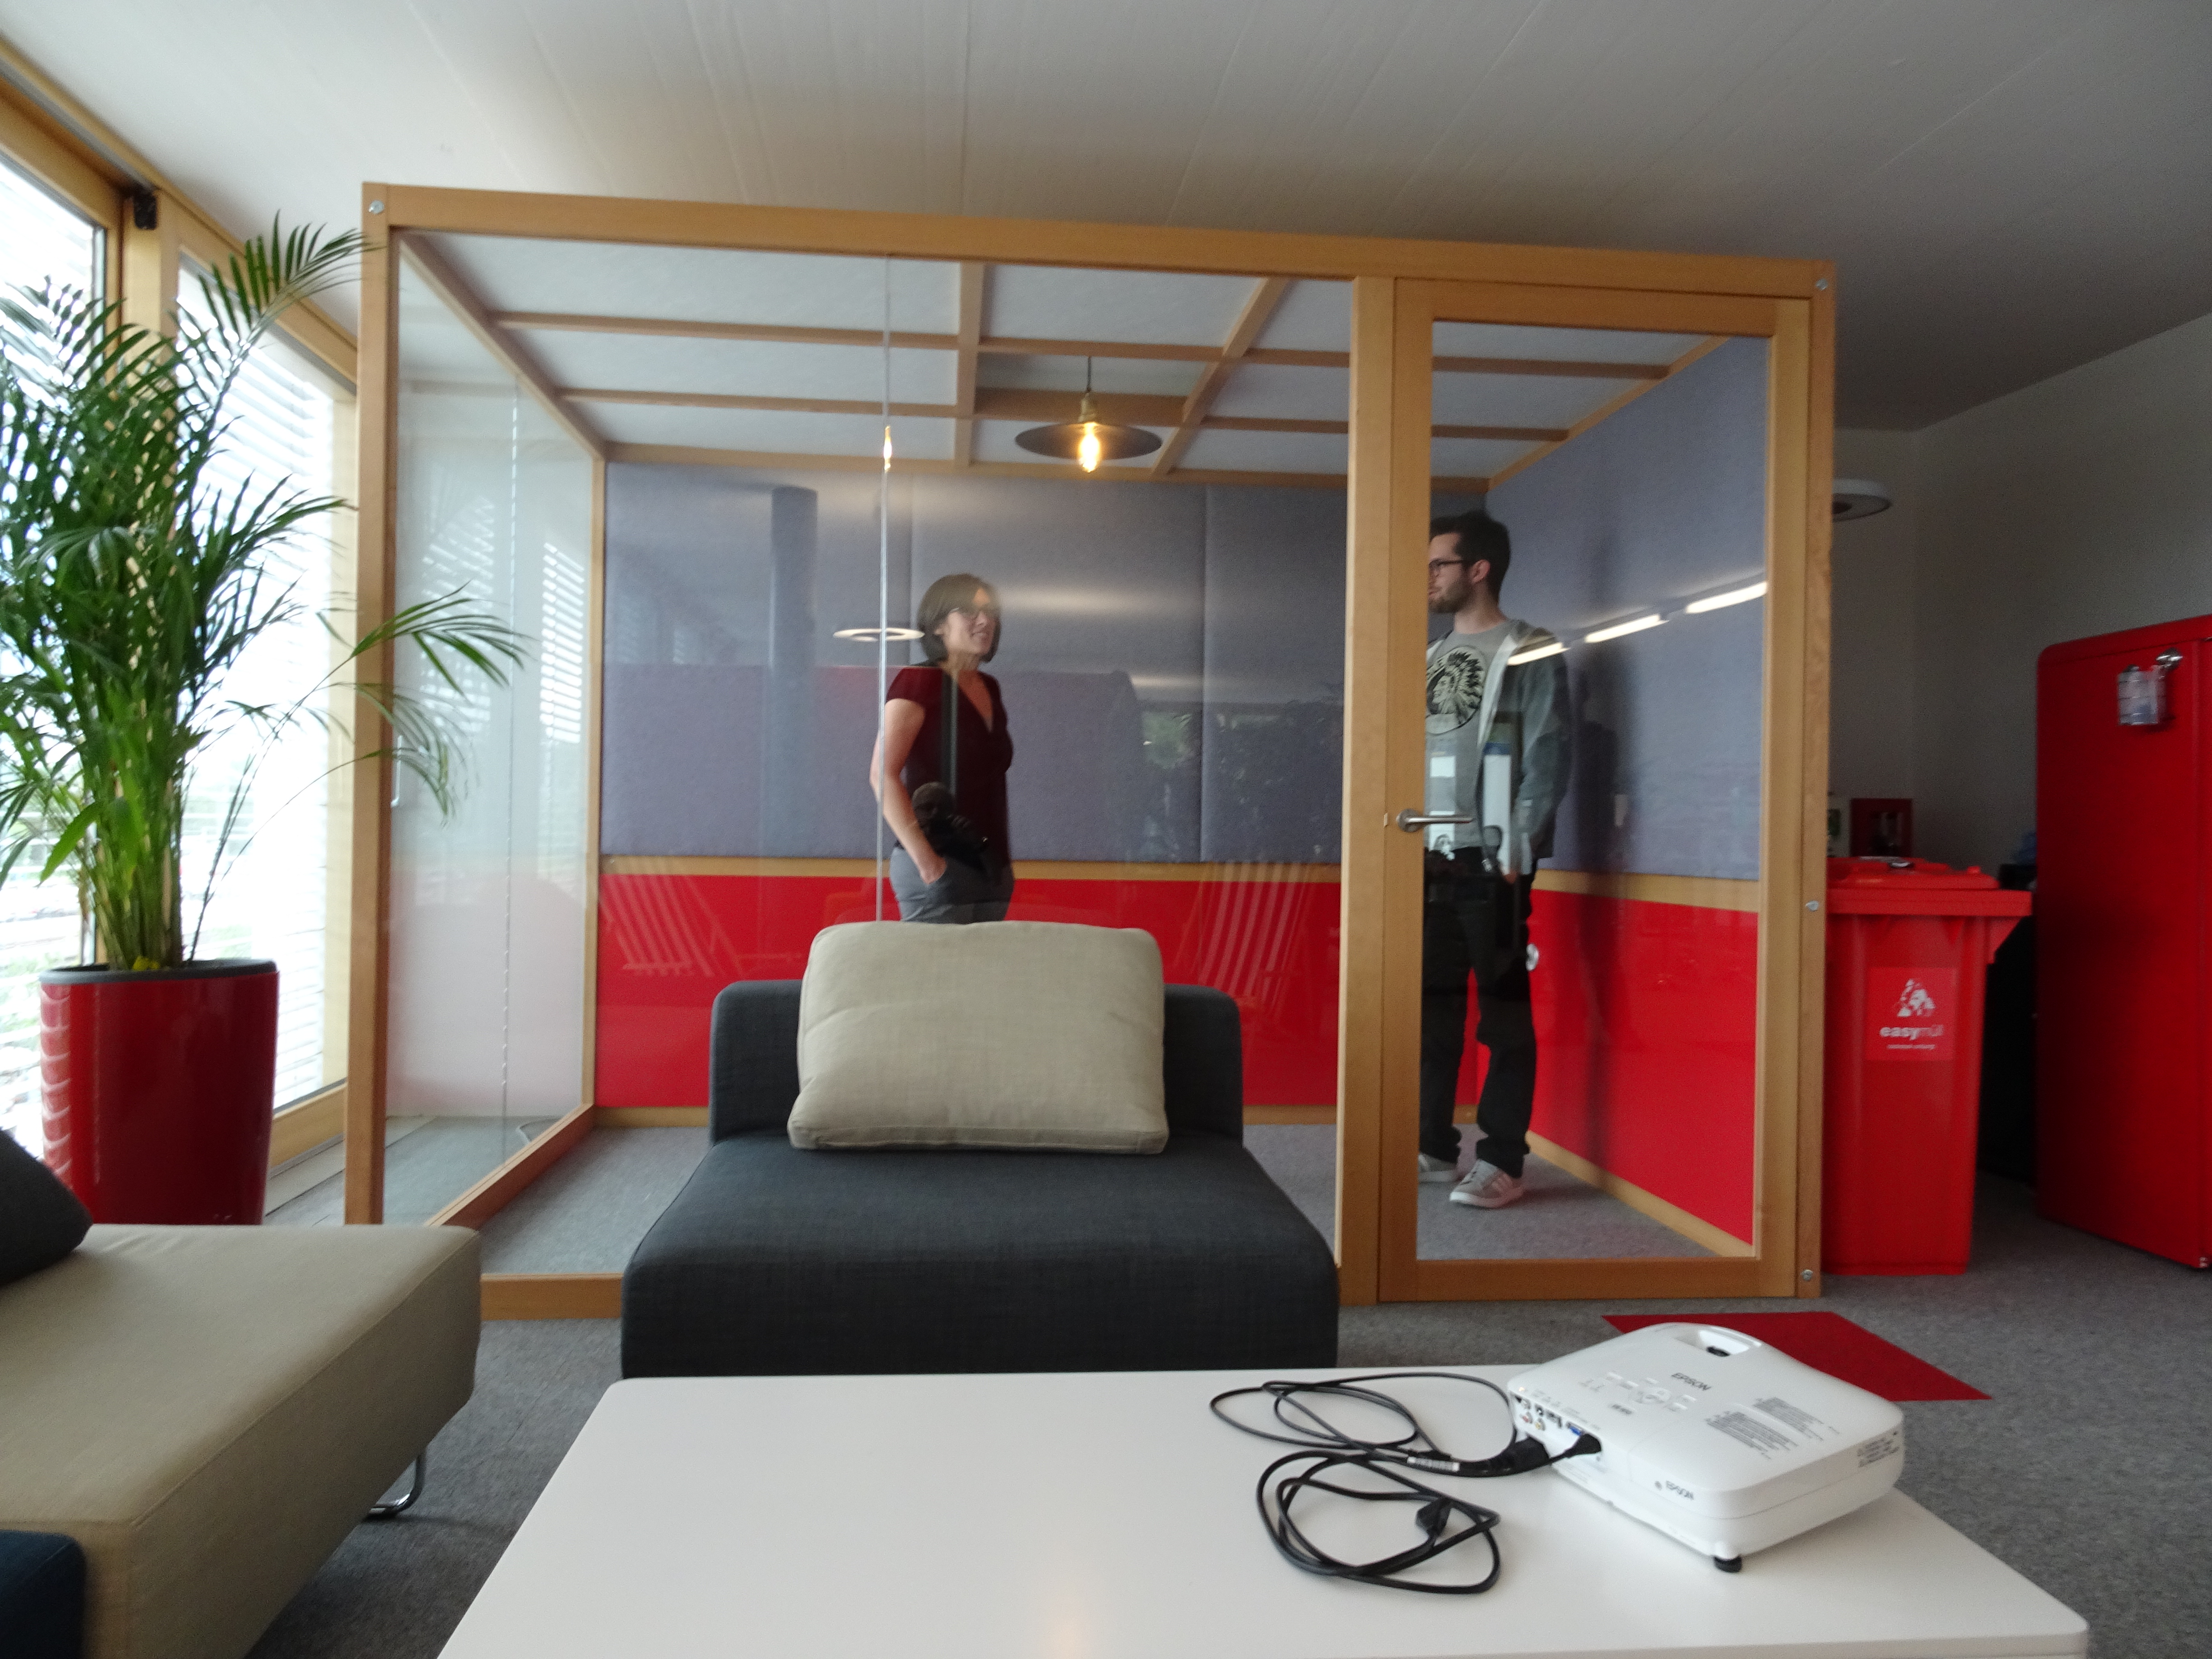 New generation acoustic pods installed for quiet office work spaces in Zurich